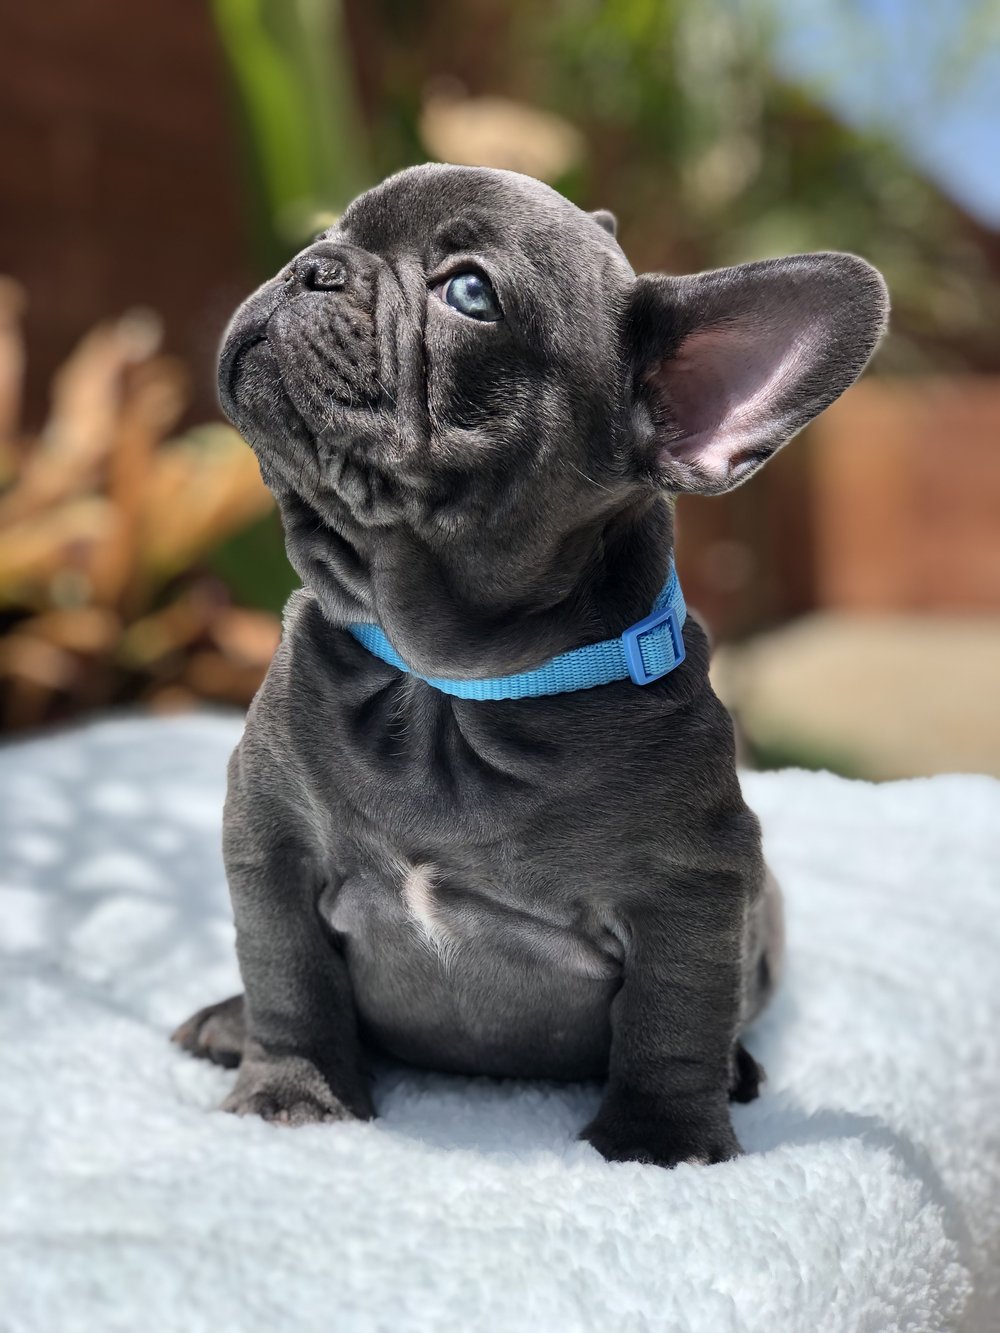 where can I get a french bulldog for cheap? 2